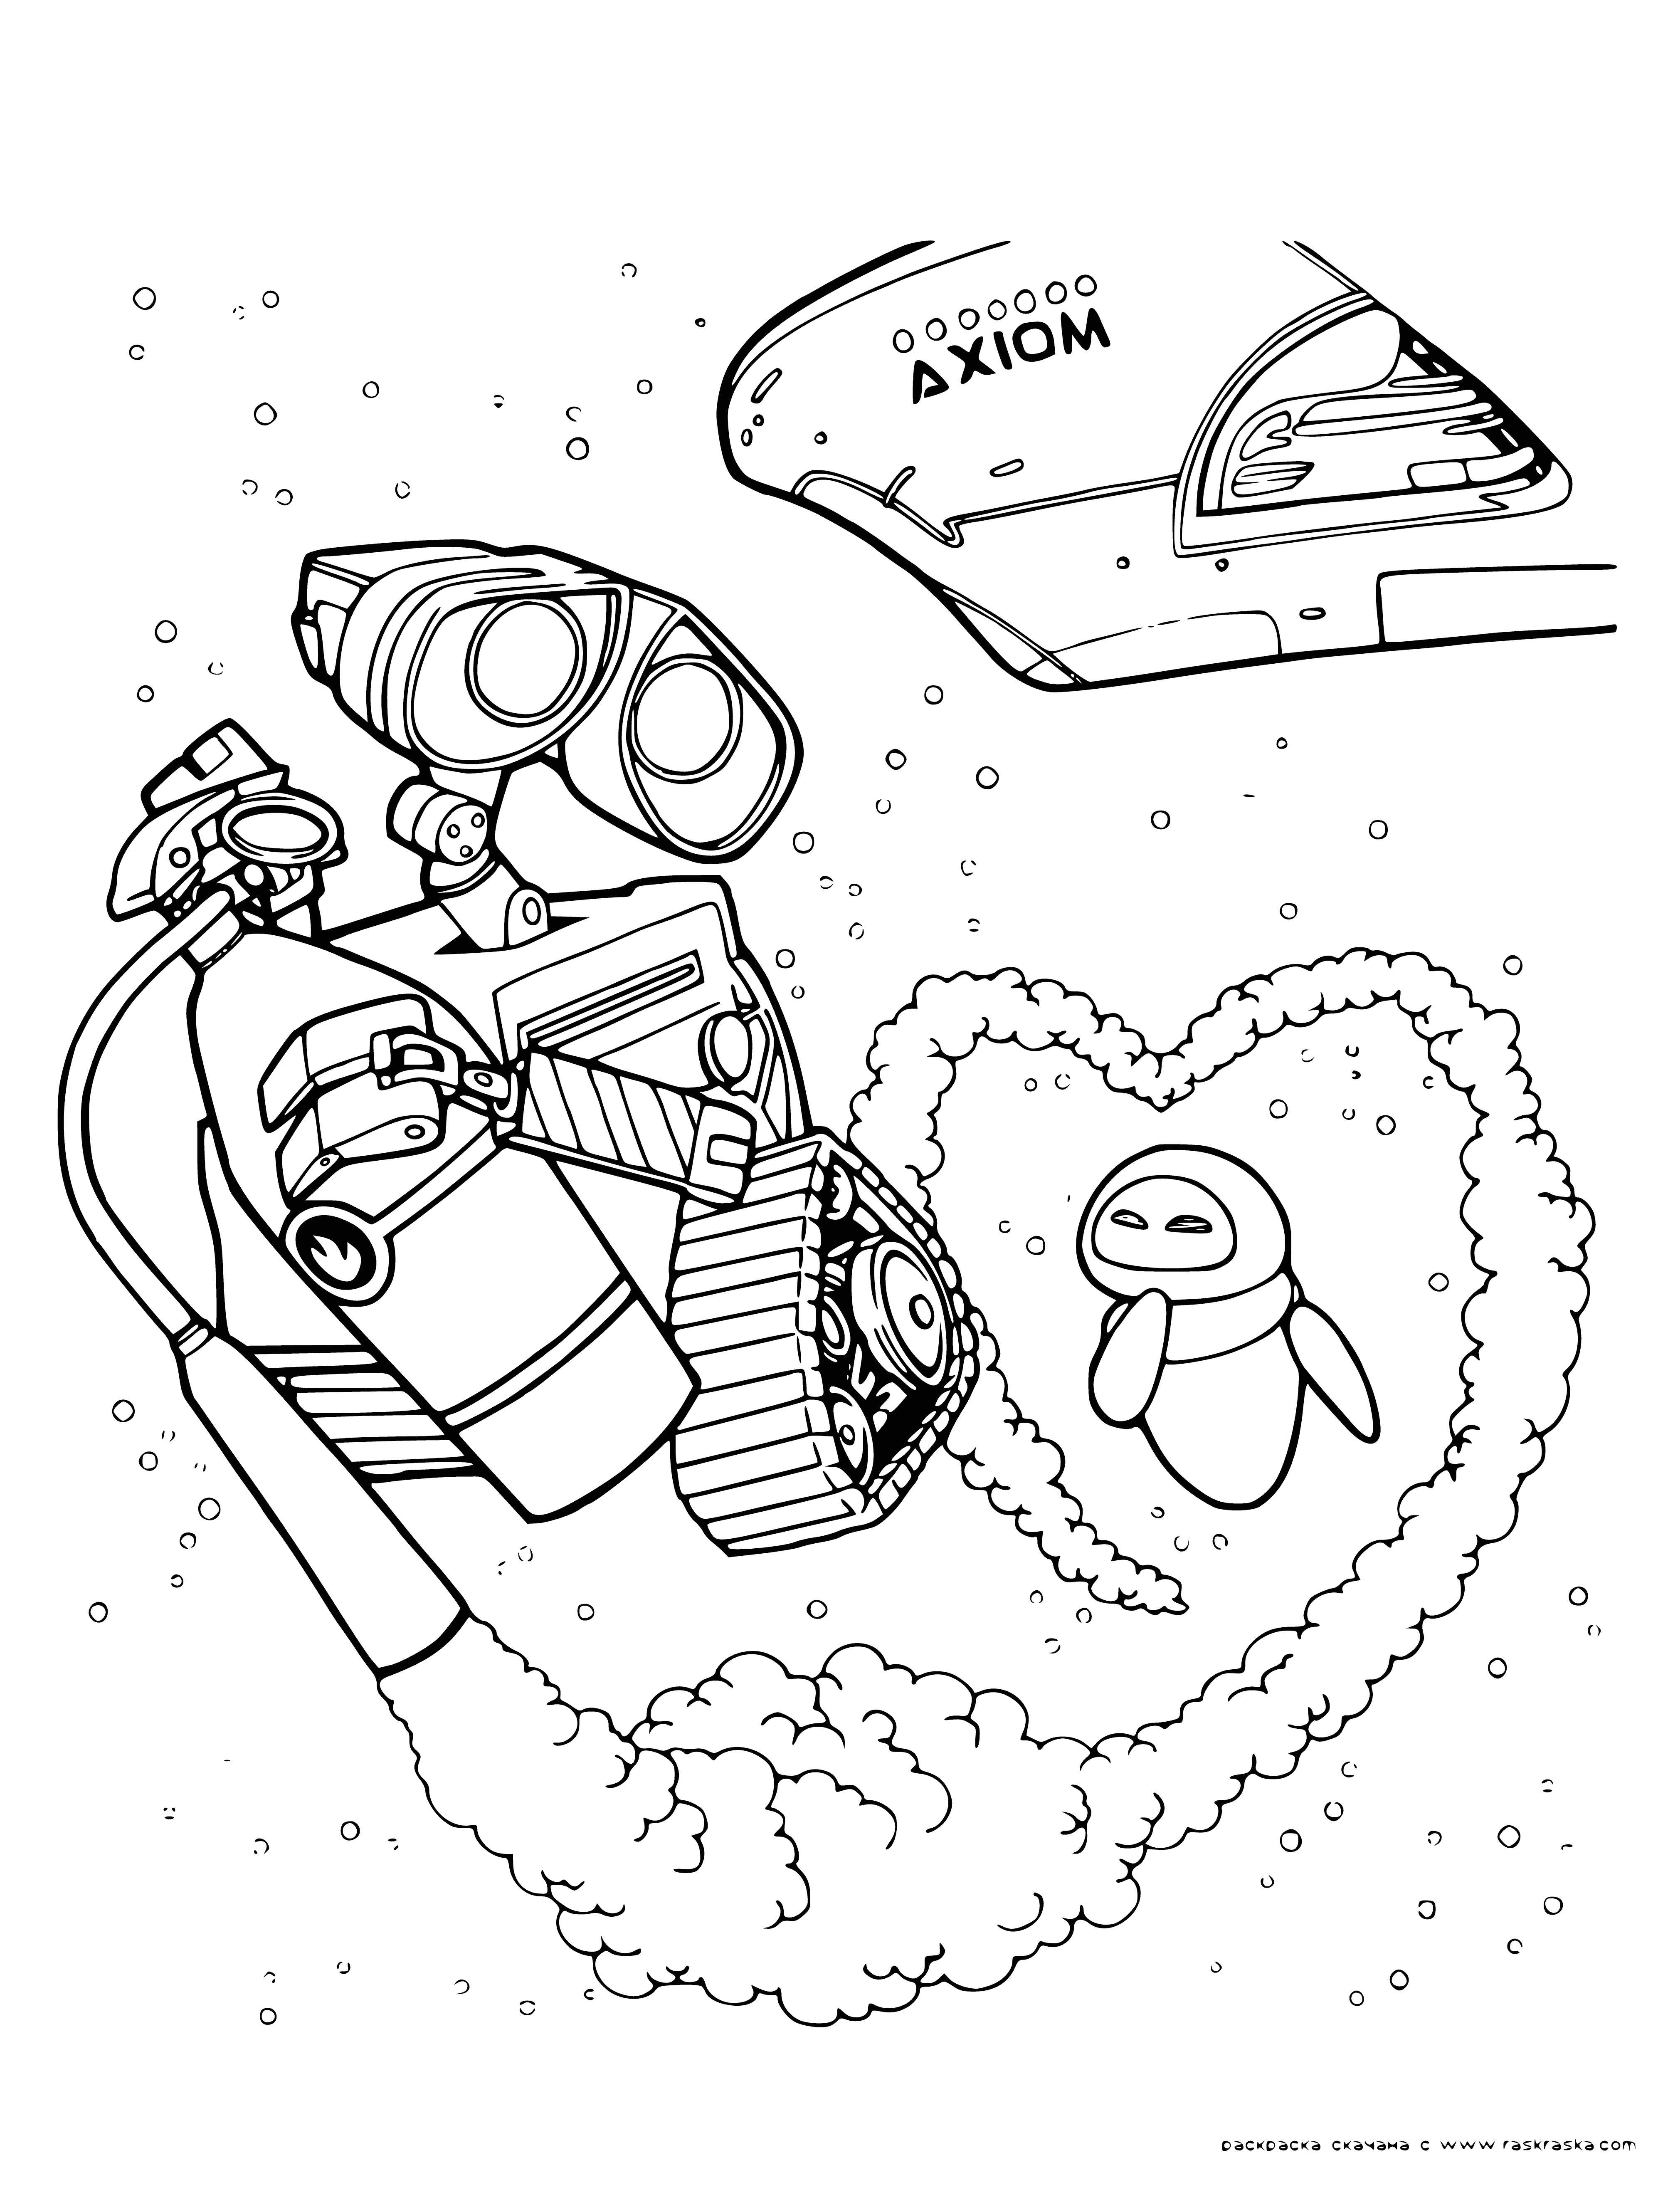 Valley and Eve coloring page